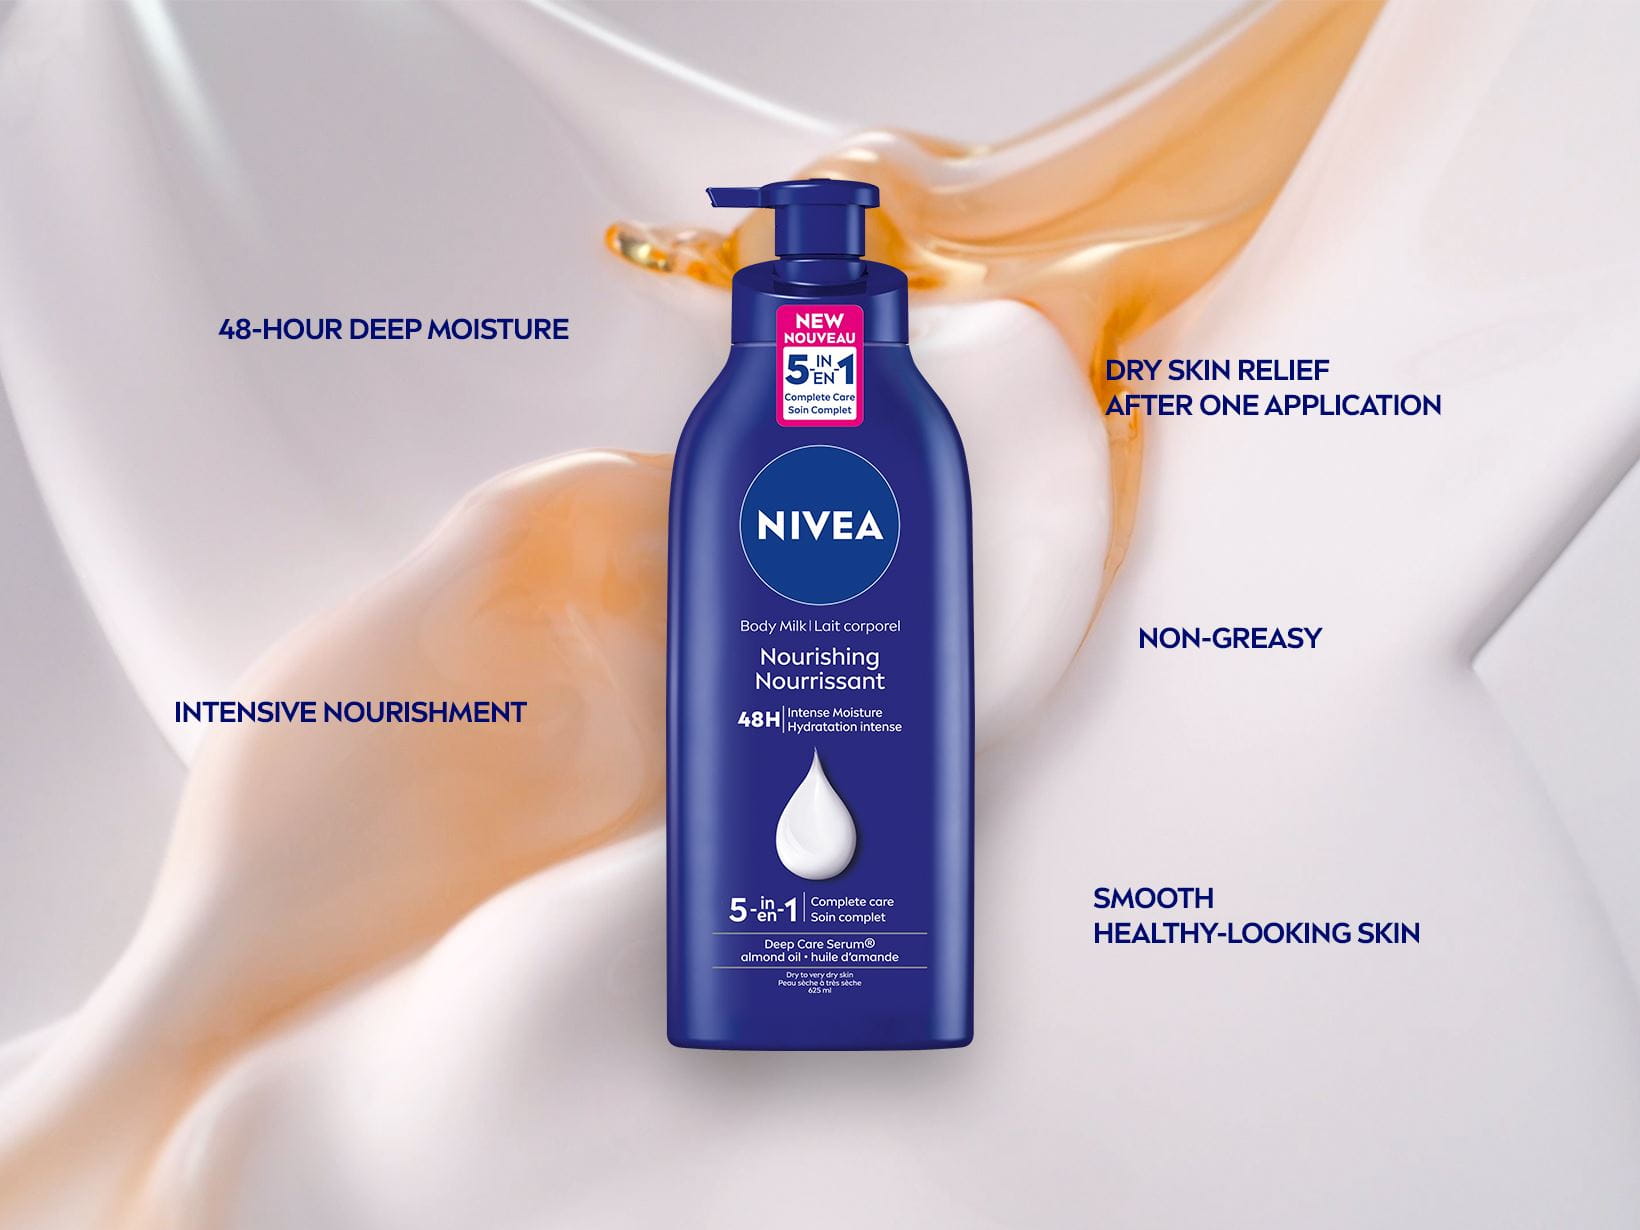 View of a NIVEA Nourishing Body Milk and new 5-in-1 Complete Care product with product text displayed over a white and orange artistic background.